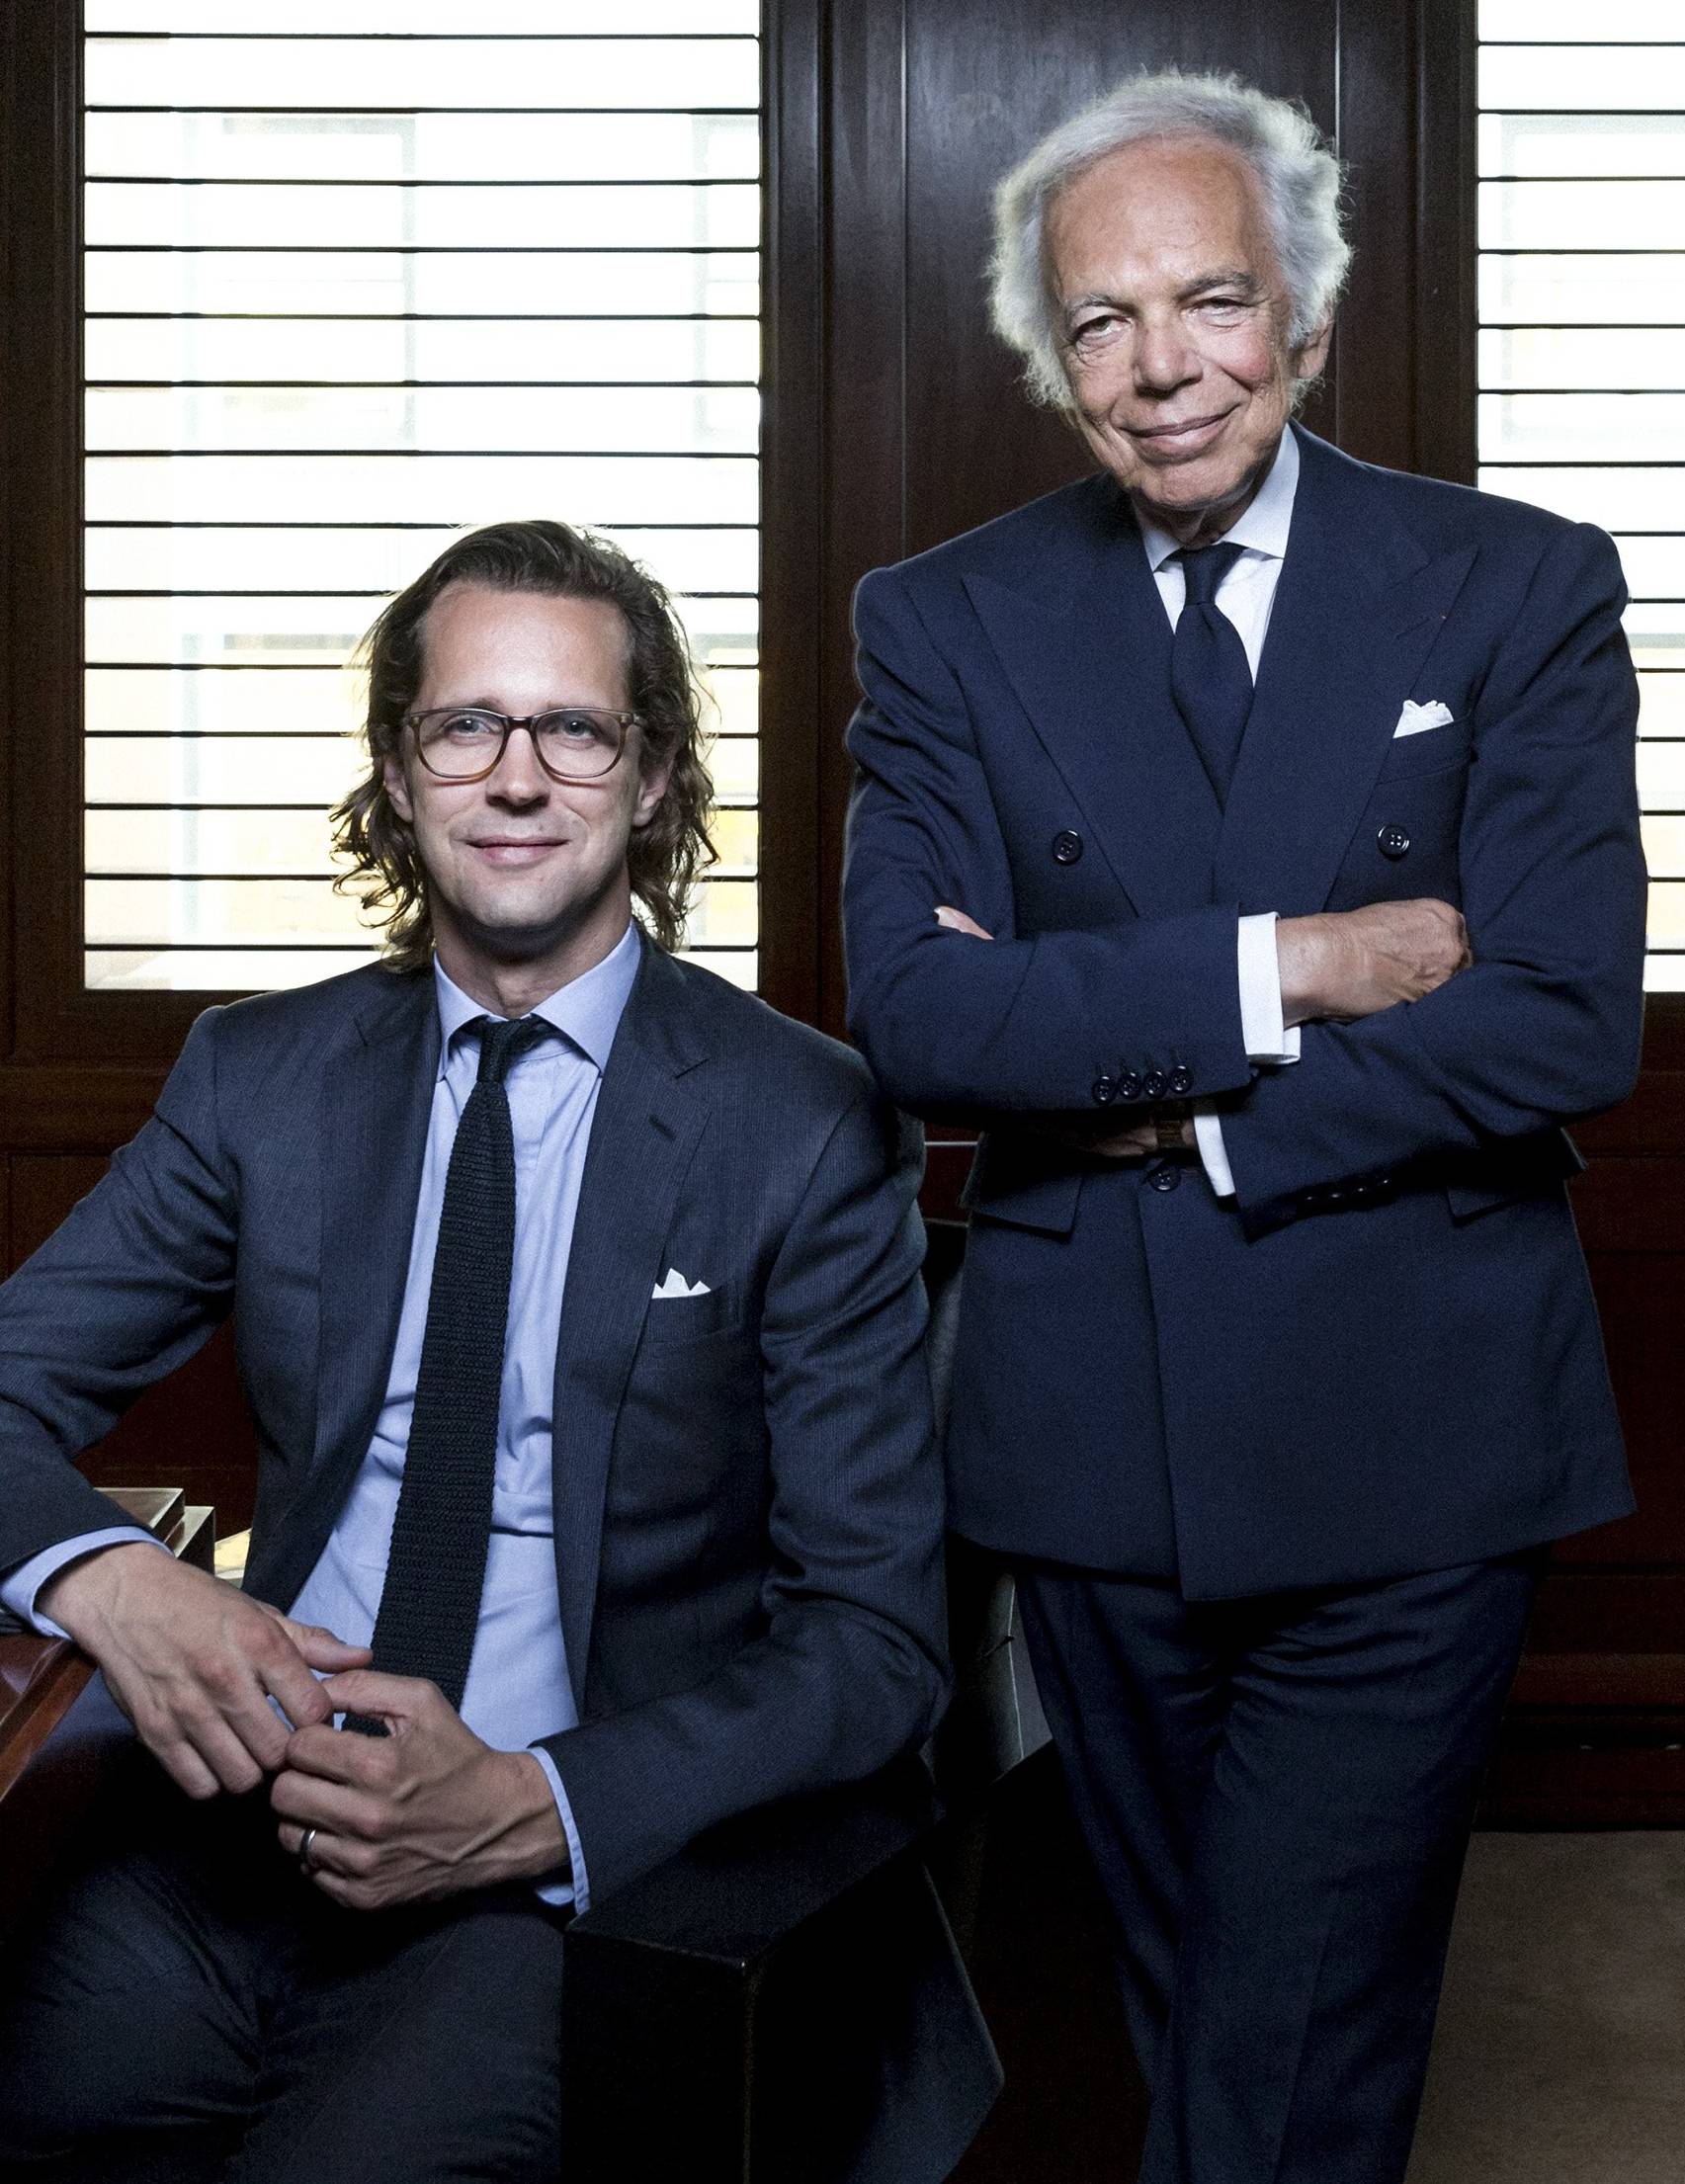 Tommy Hilfiger joins Calvin Klein, Lord & Taylor, and Gap in closing a  major flagship store in New York